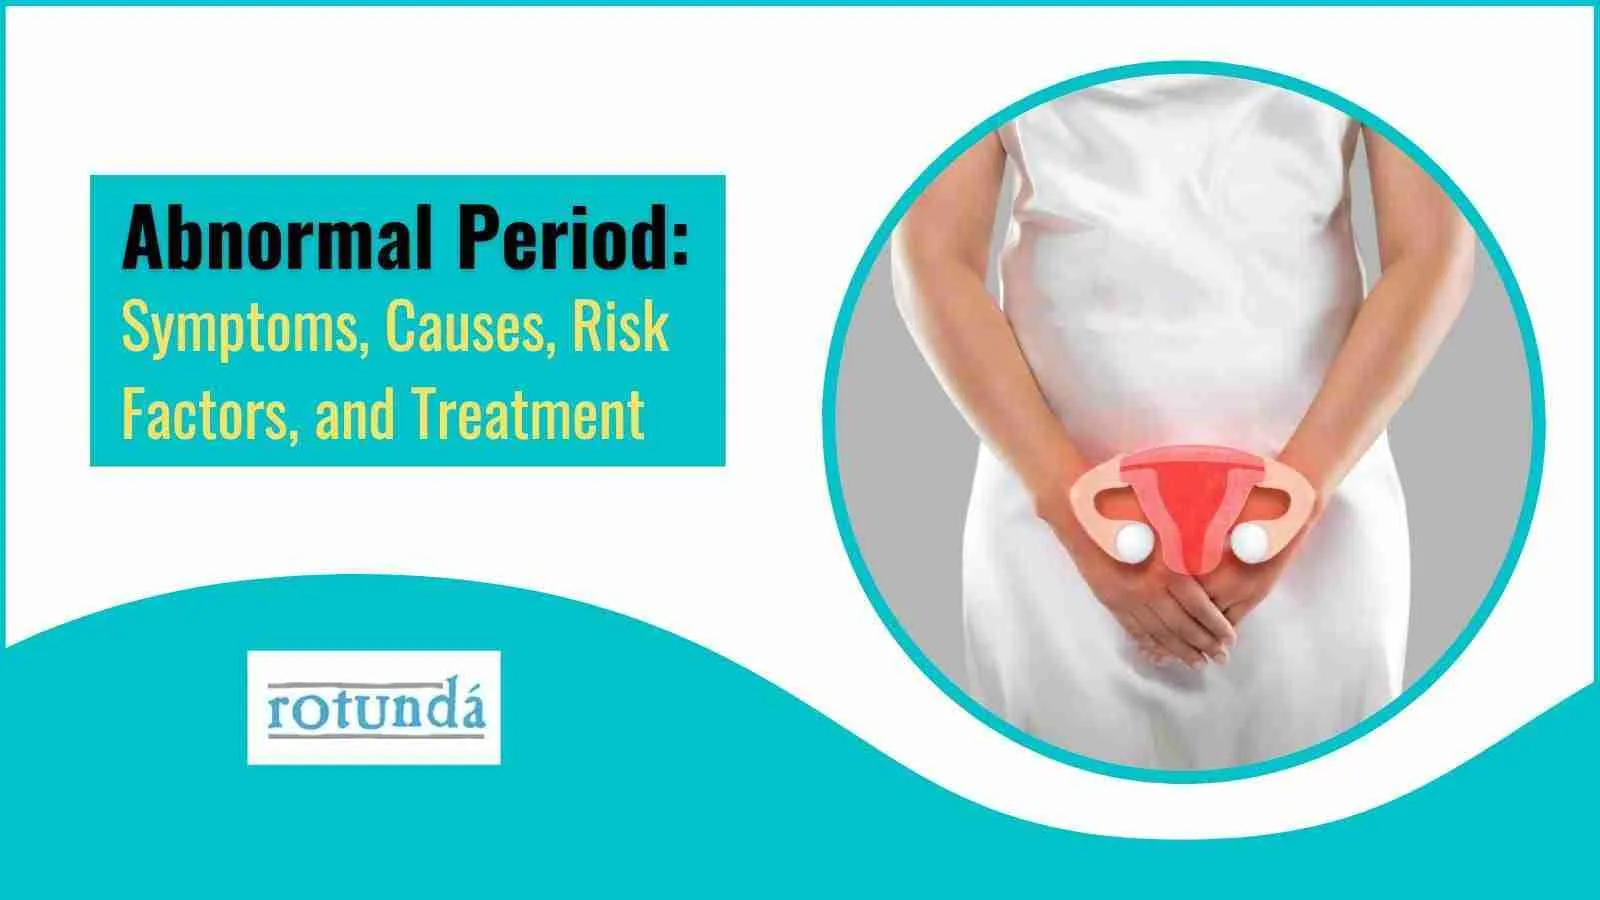 Abnormal Period: Symptoms, Causes, Risk Factor, and Treatment